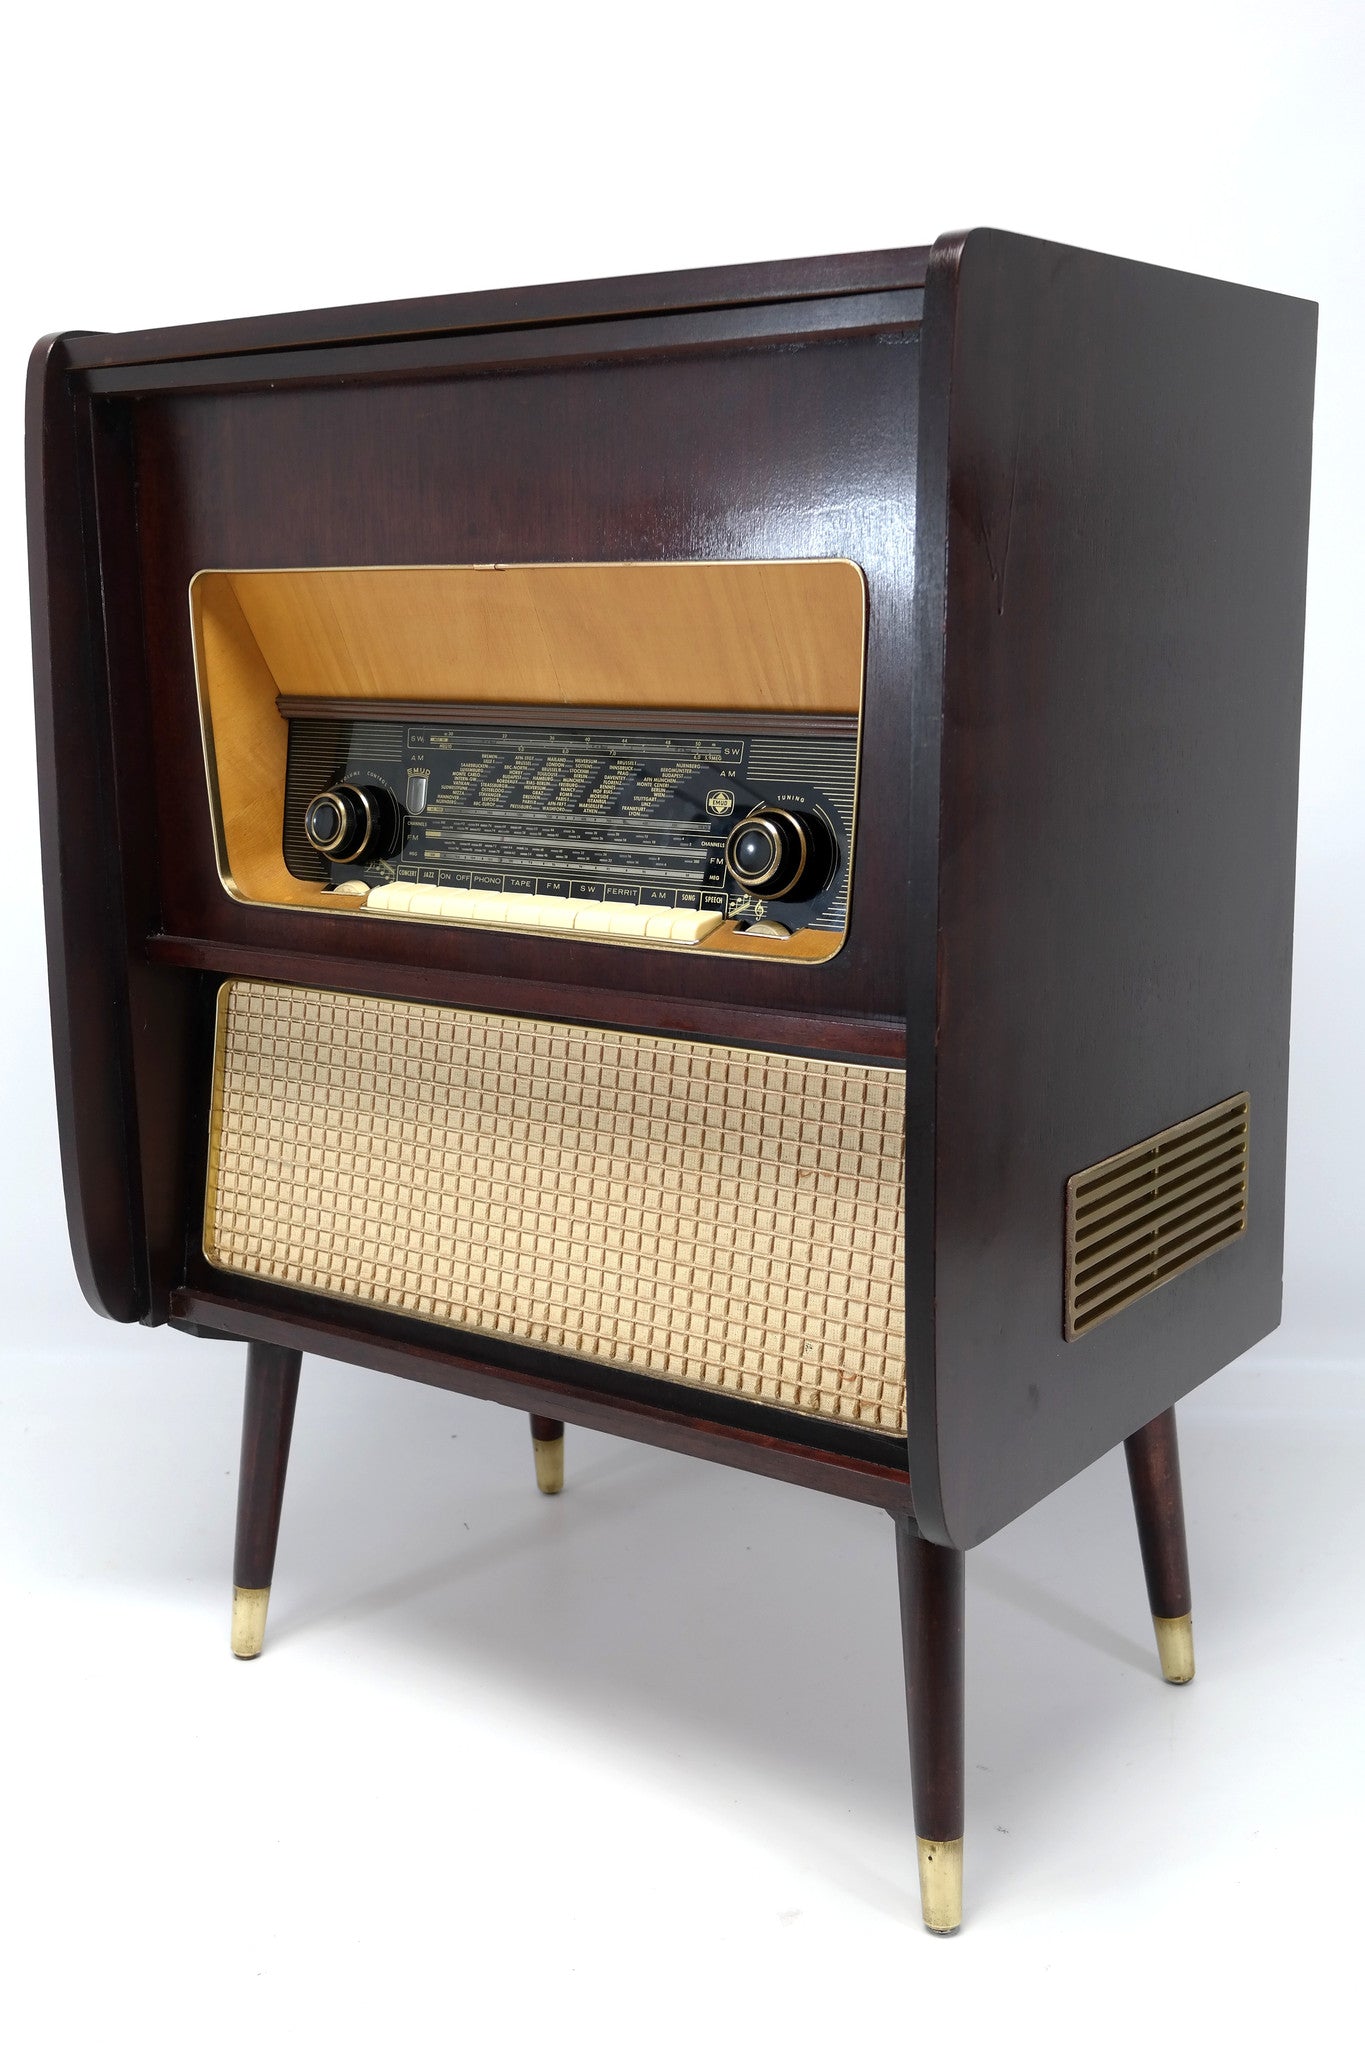 Mid Century EMUD 713 Stereo Console Record Player - Bluetooth iPod iPhone Android Input AM/FM Tuner The Vintedge Co.